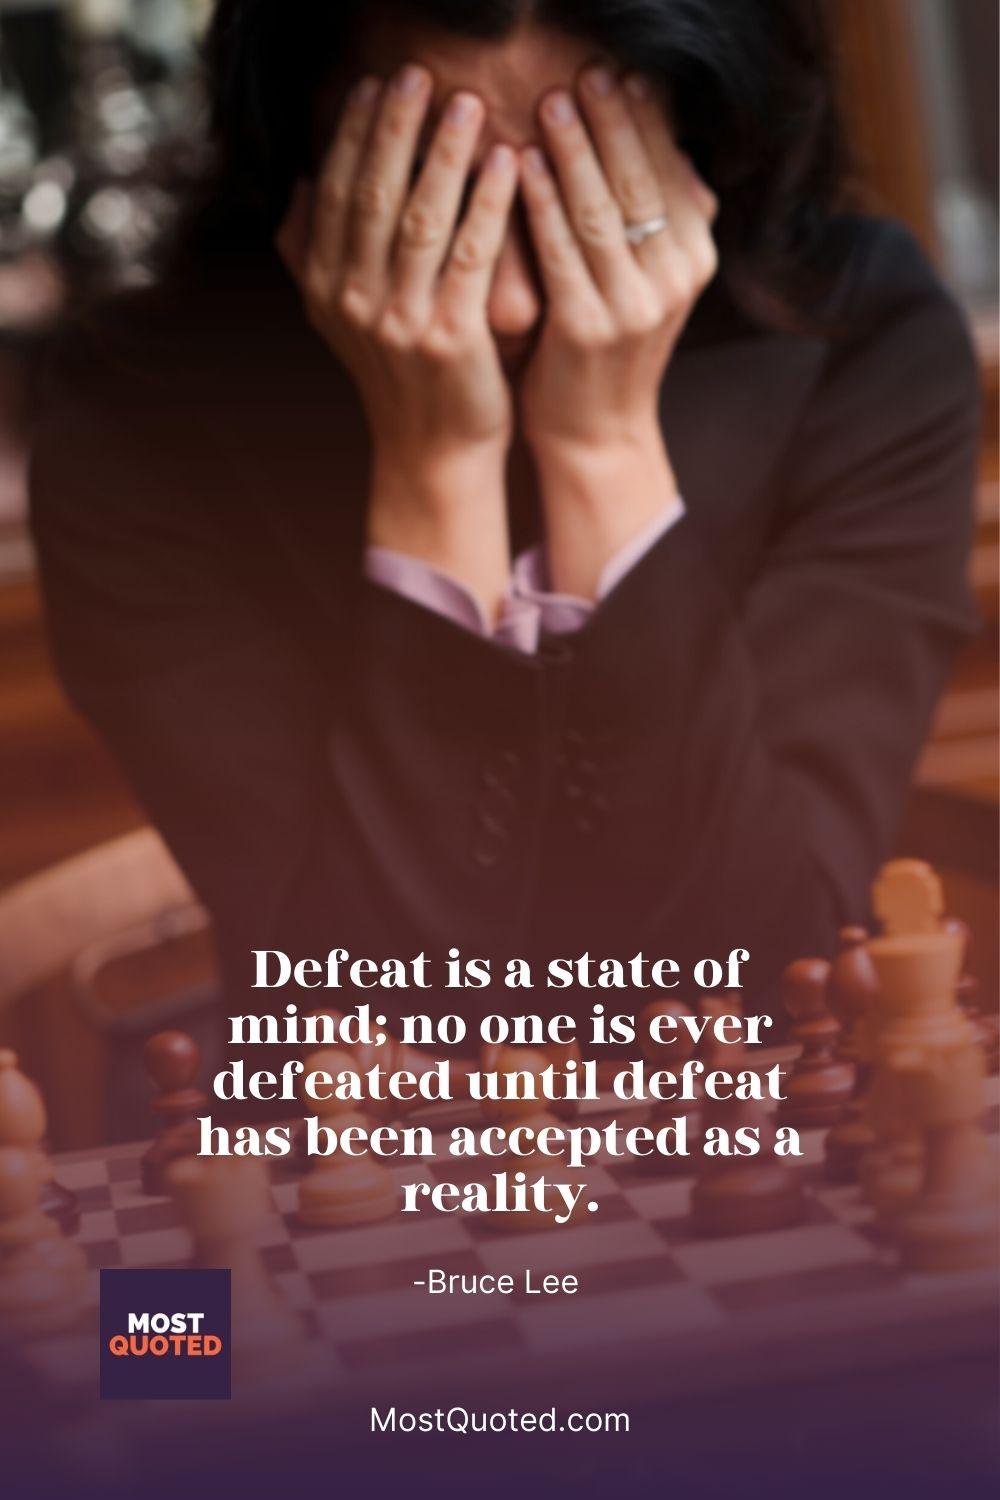 Defeat is a state of mind; no one is ever defeated until defeat has been accepted as a reality. - Bruce Lee